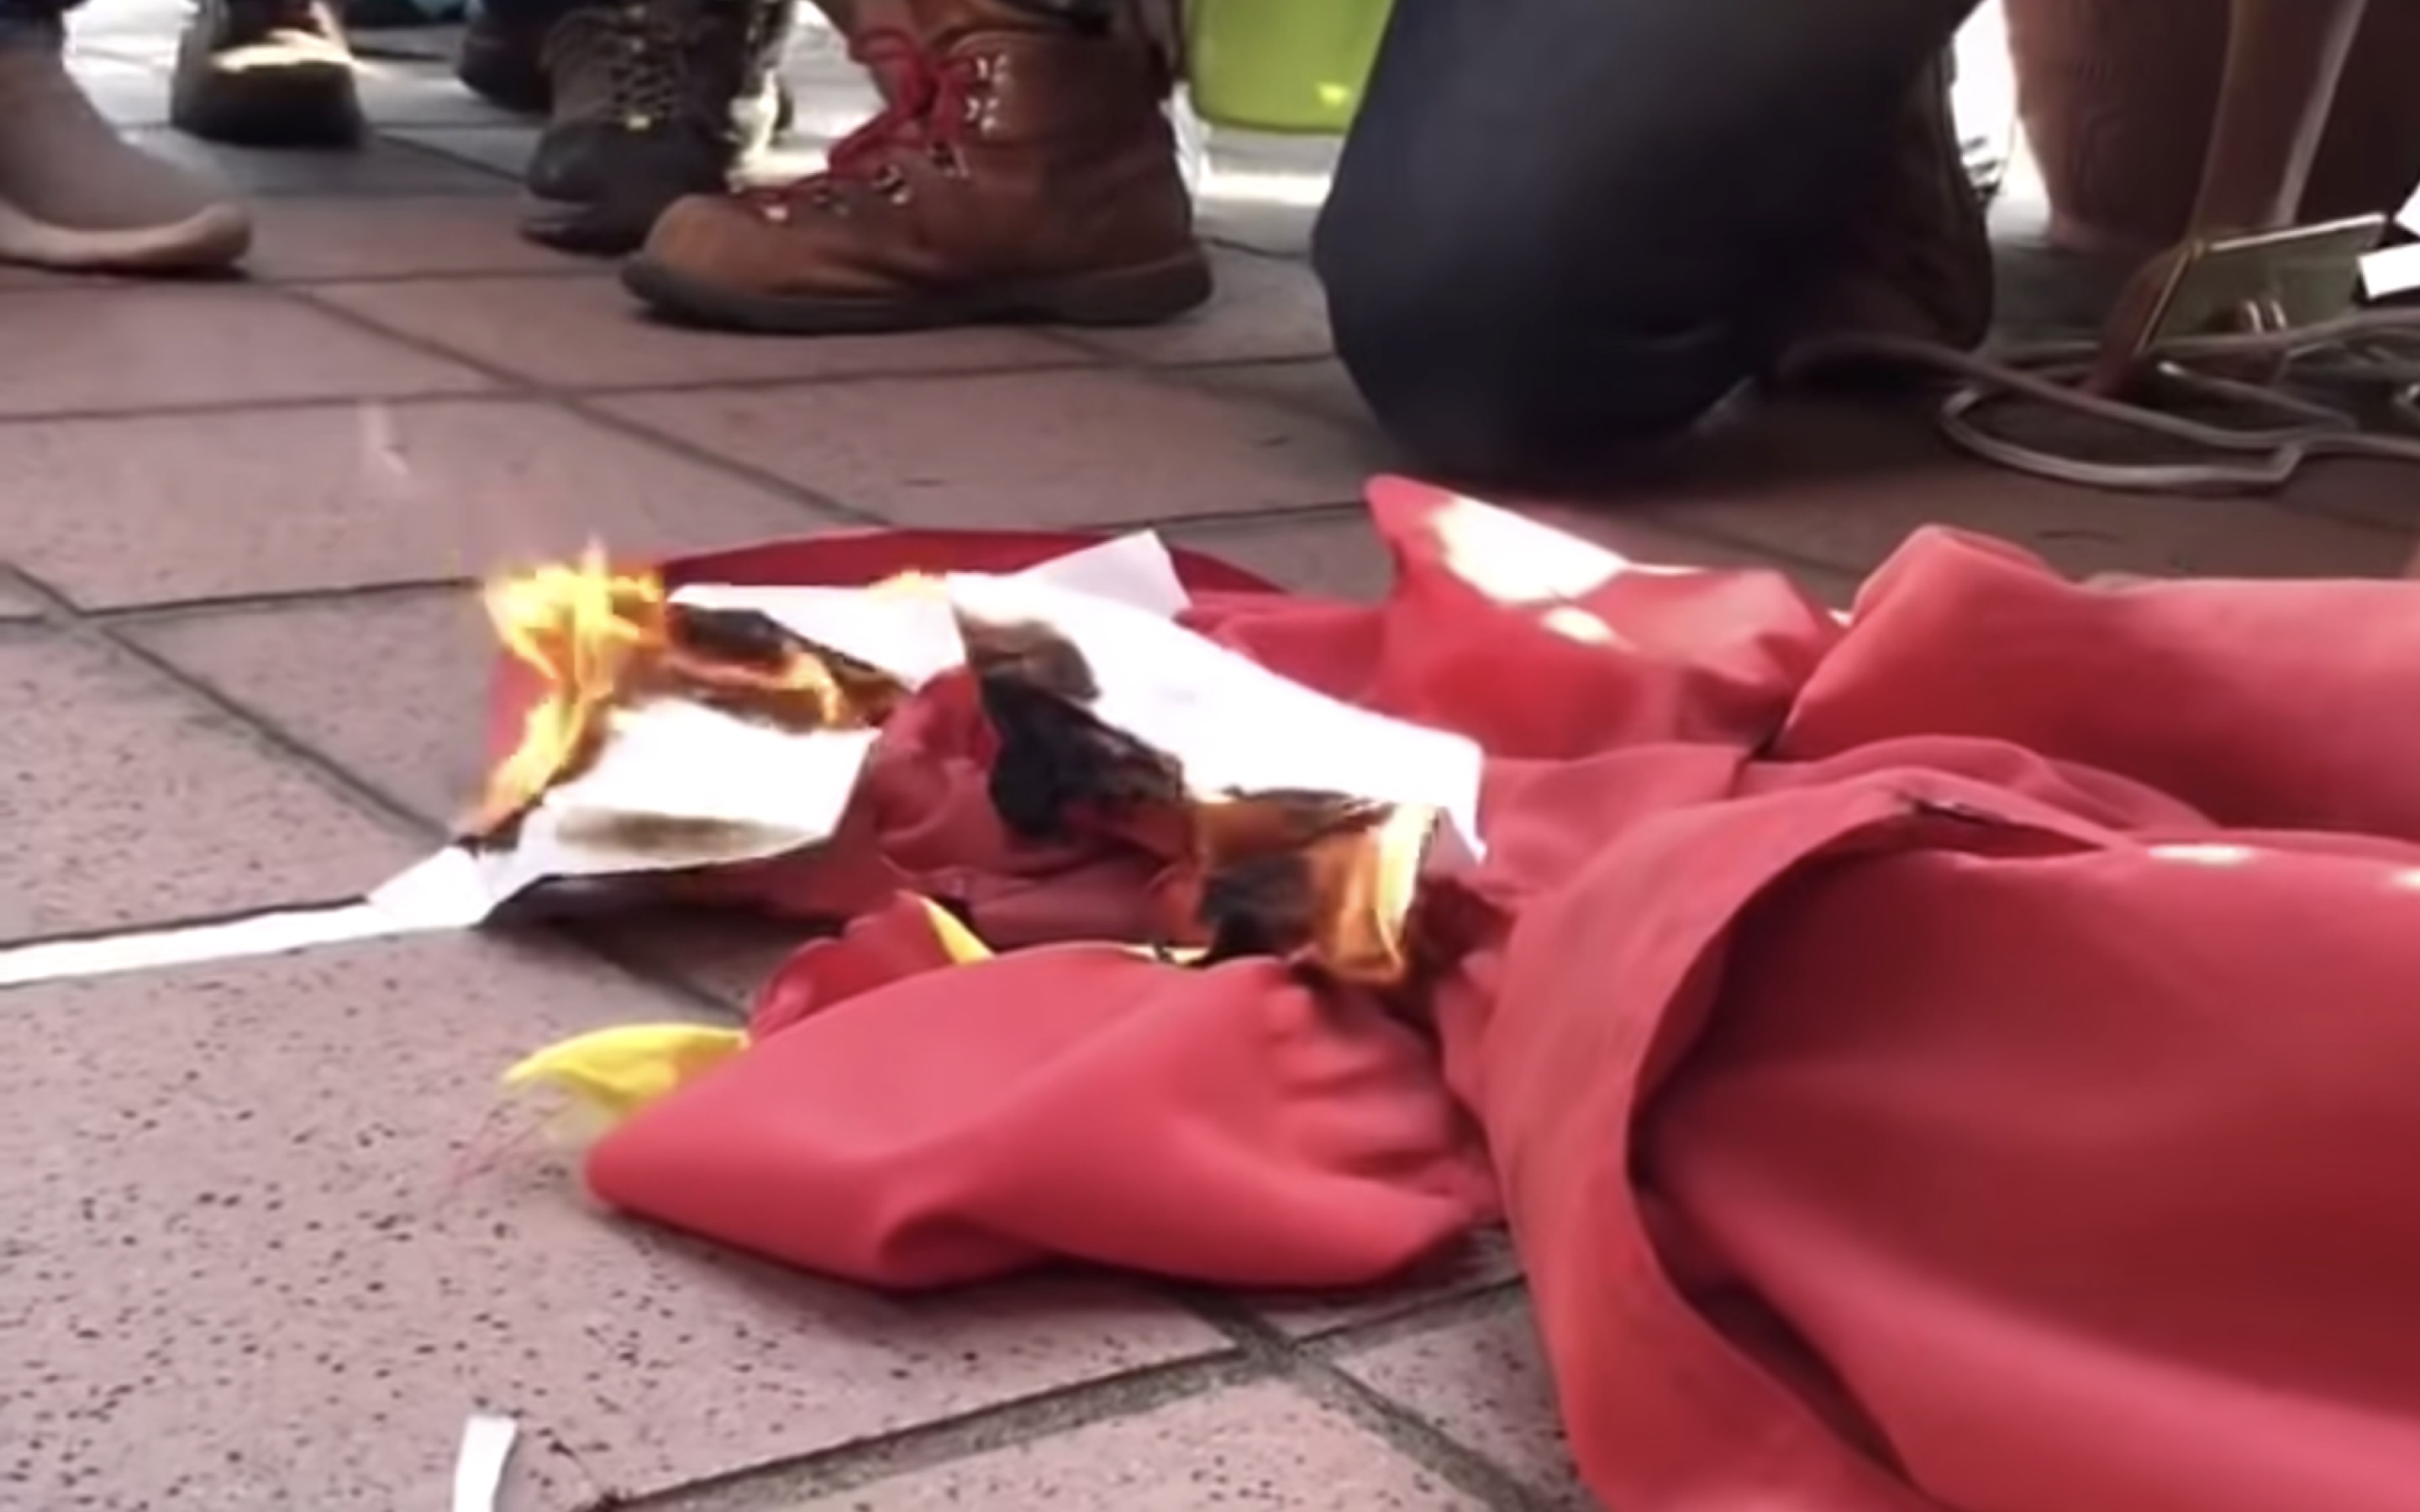 The moment protesters set the Chinese national flag on fire on September 21, 2019. Screengrab via YouTube.